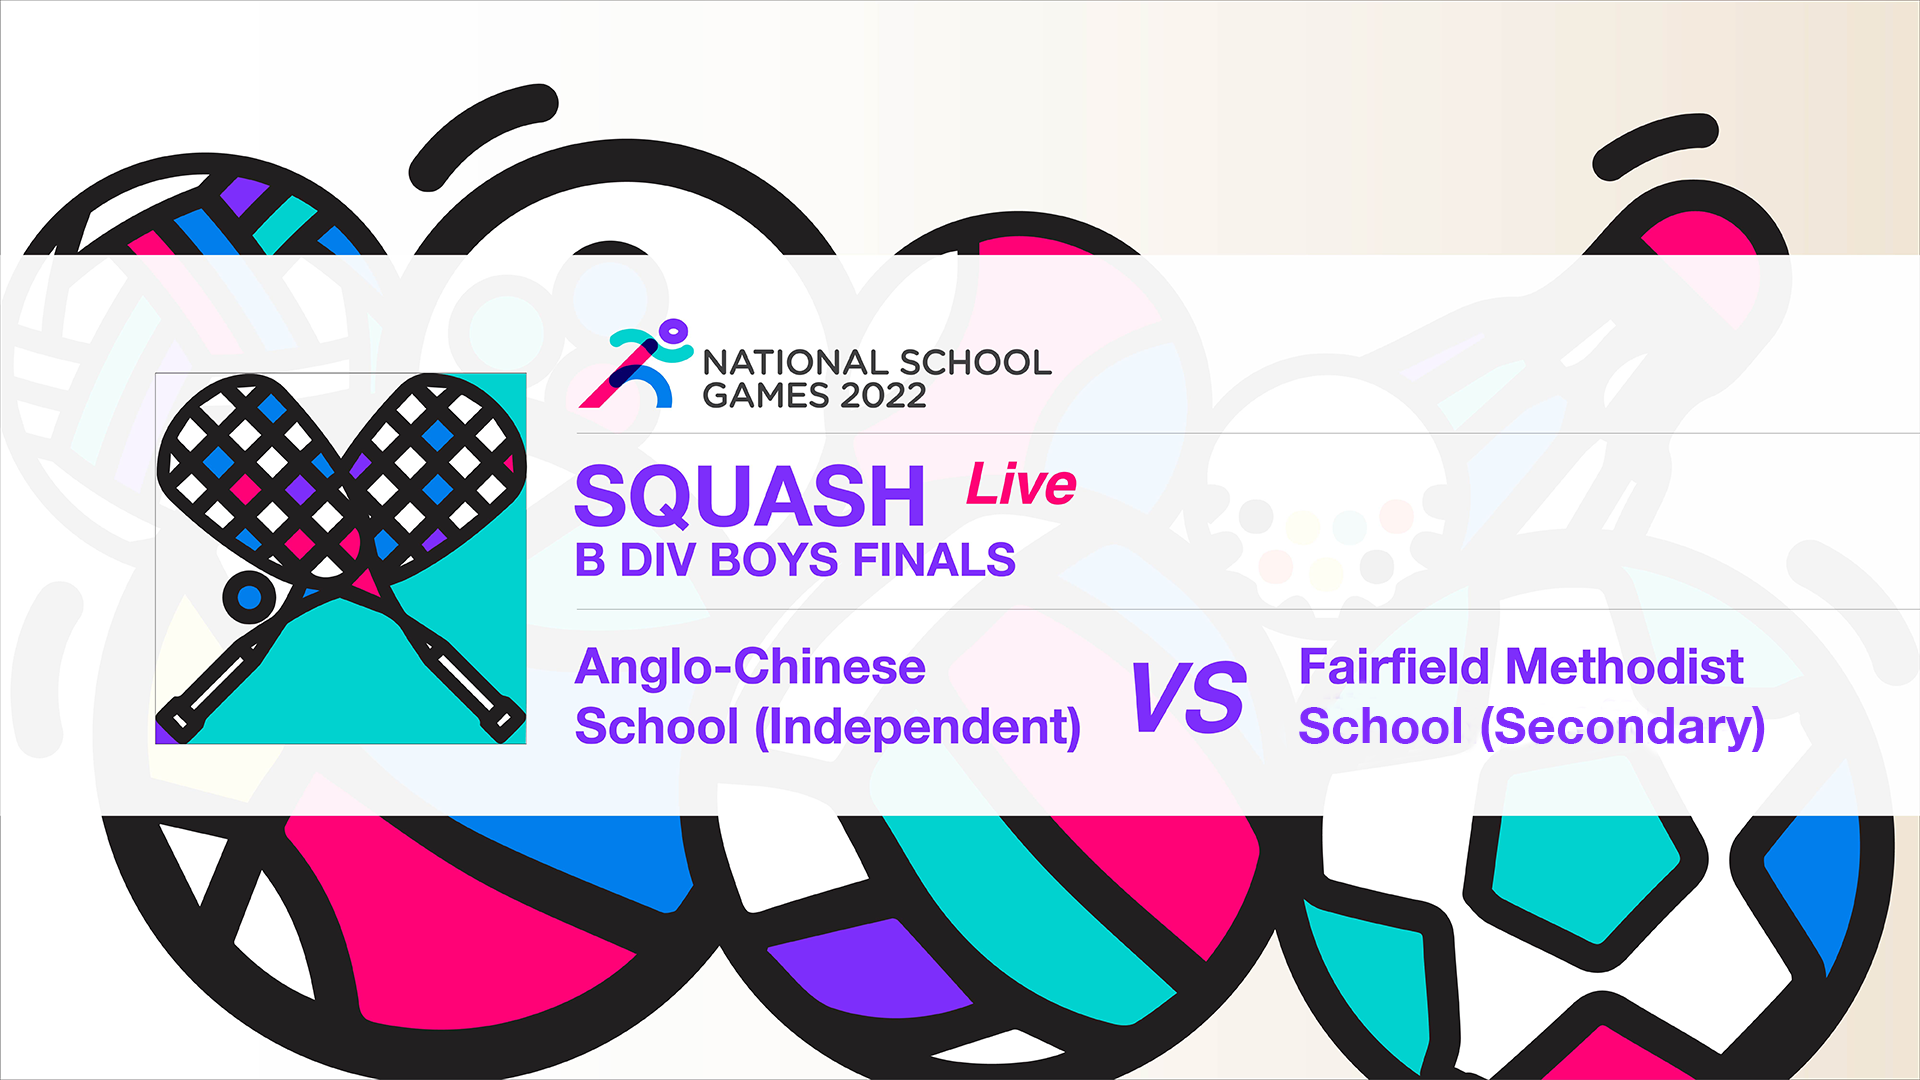 SSSC Squash National B Div Boys Final | Anglo-Chinese School (Independent) vs Fairfield Methodist School (Secondary)